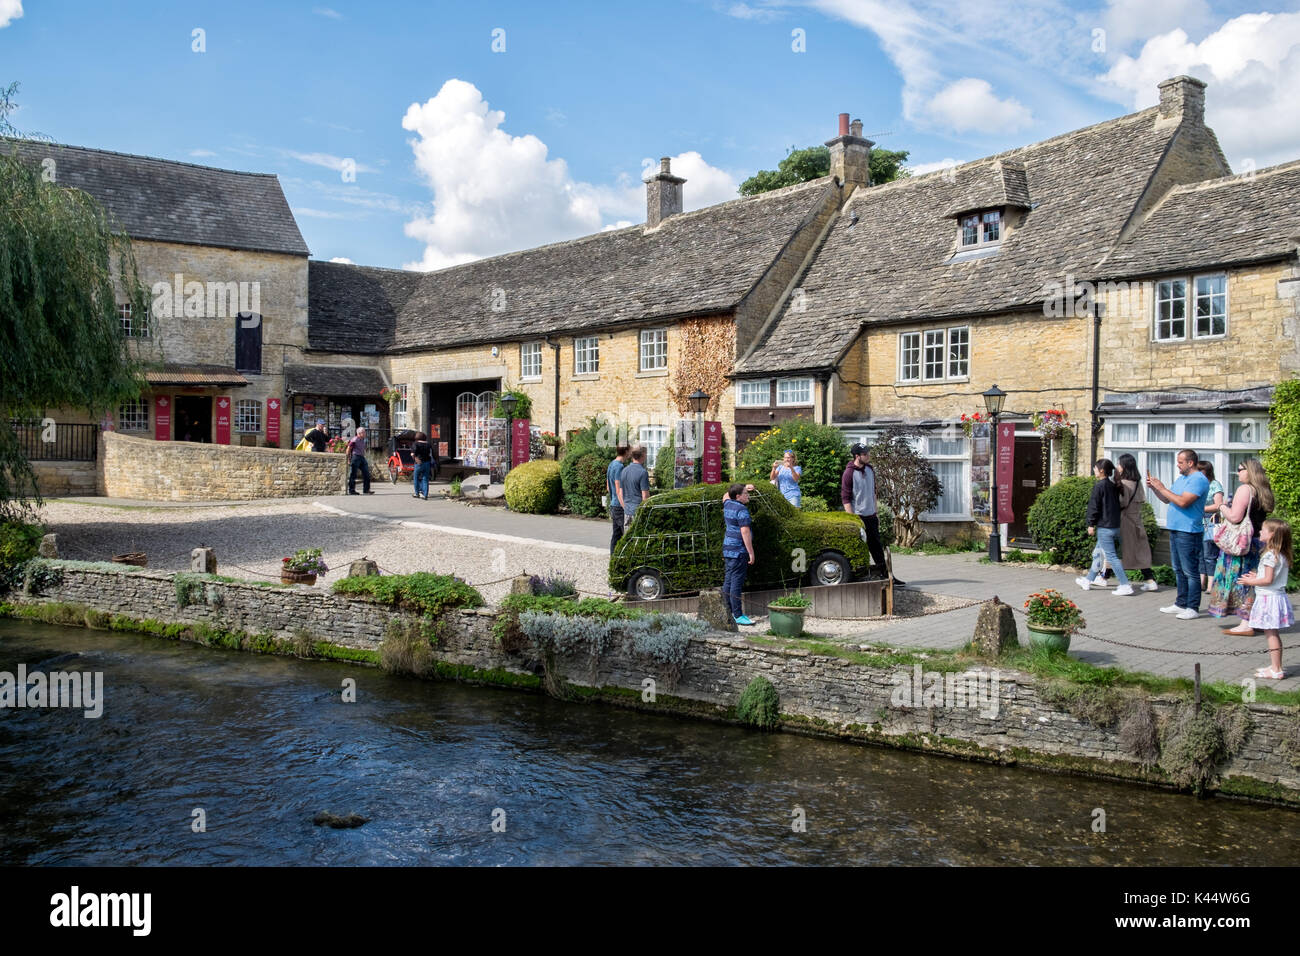 The Cotswold motoring museum on a sunny day in Bourton on the Water, Gloucetershire, UK. Viewed from across the river Windrush Stock Photo